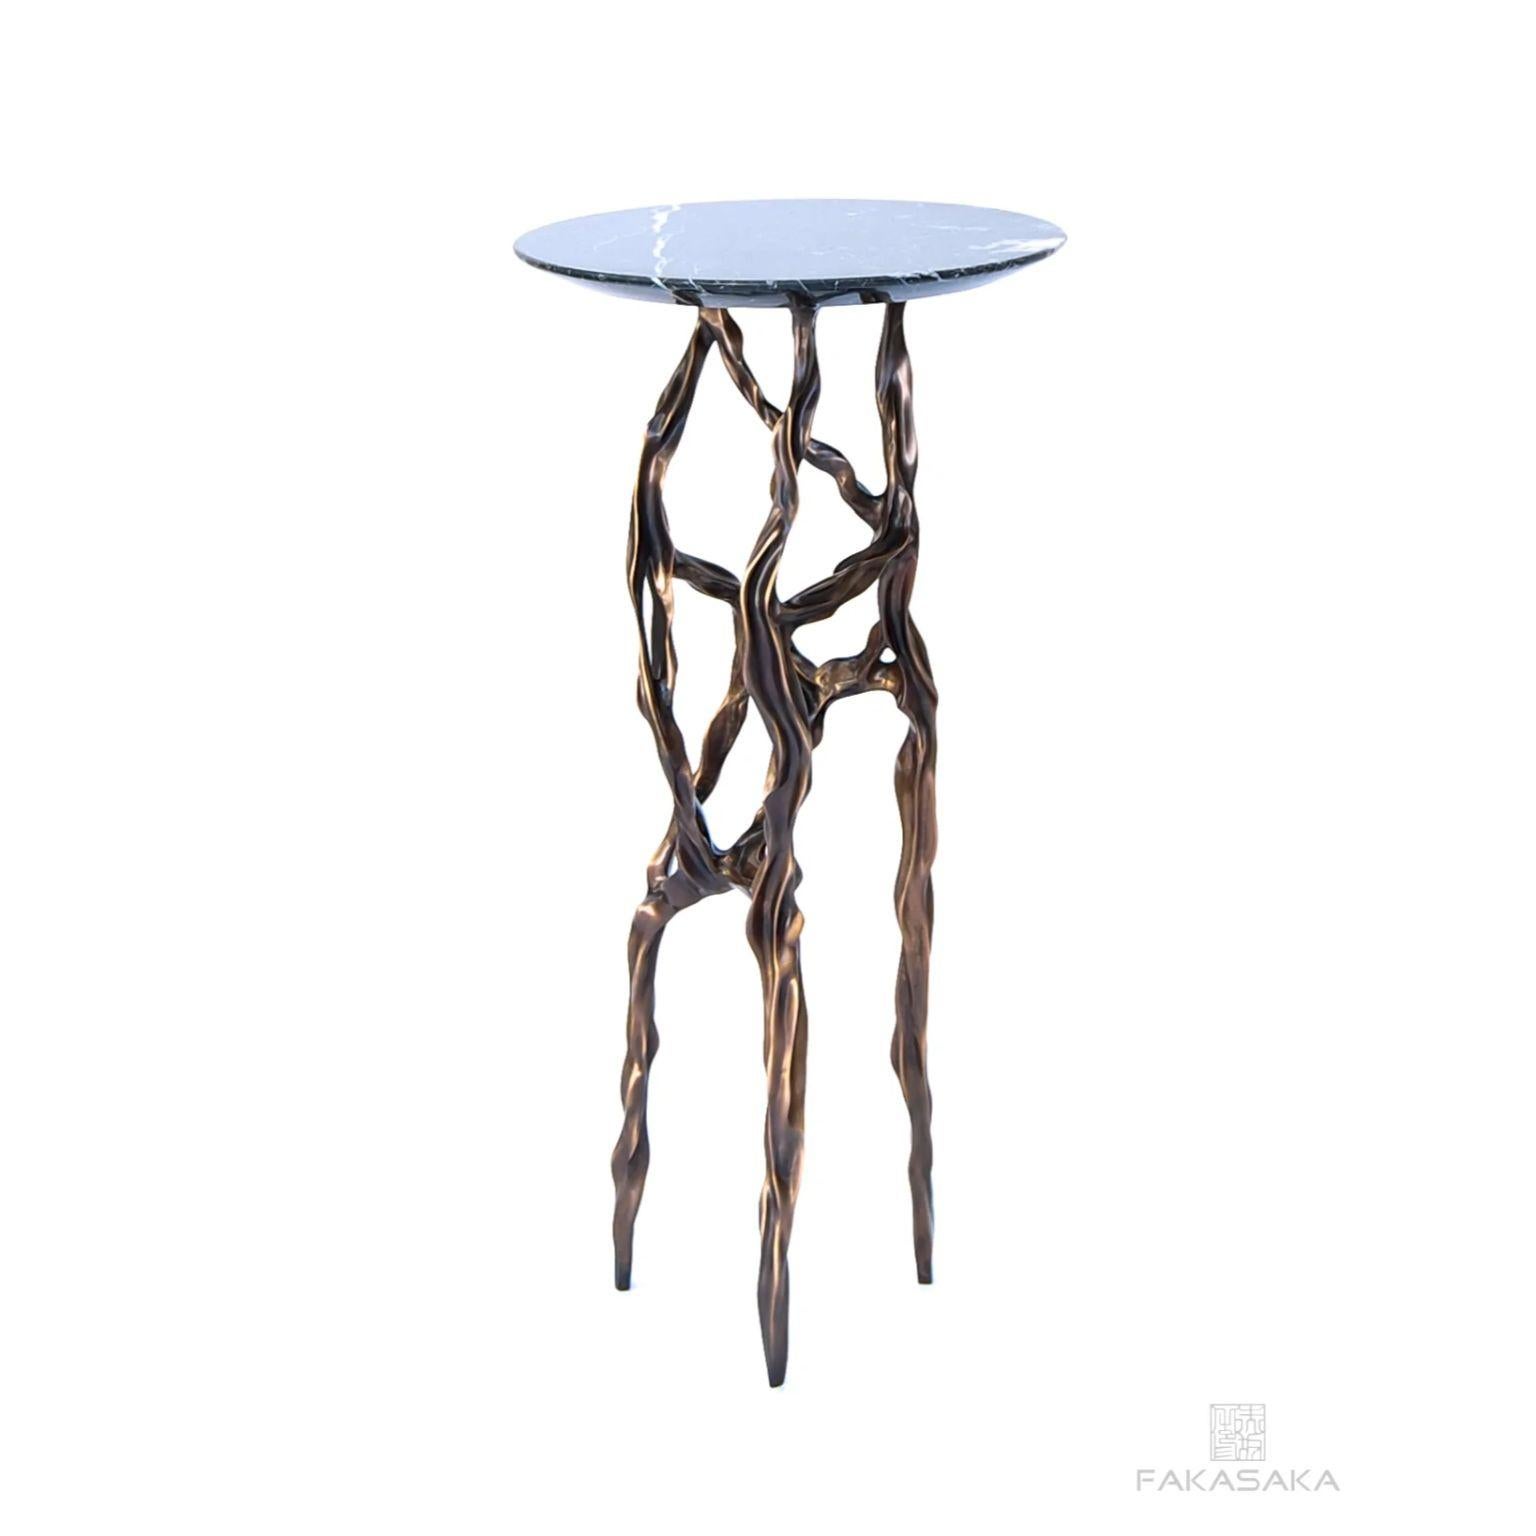 Modern Alexia Drink Table with Nero Marquina Marble Top by Fakasaka Design For Sale